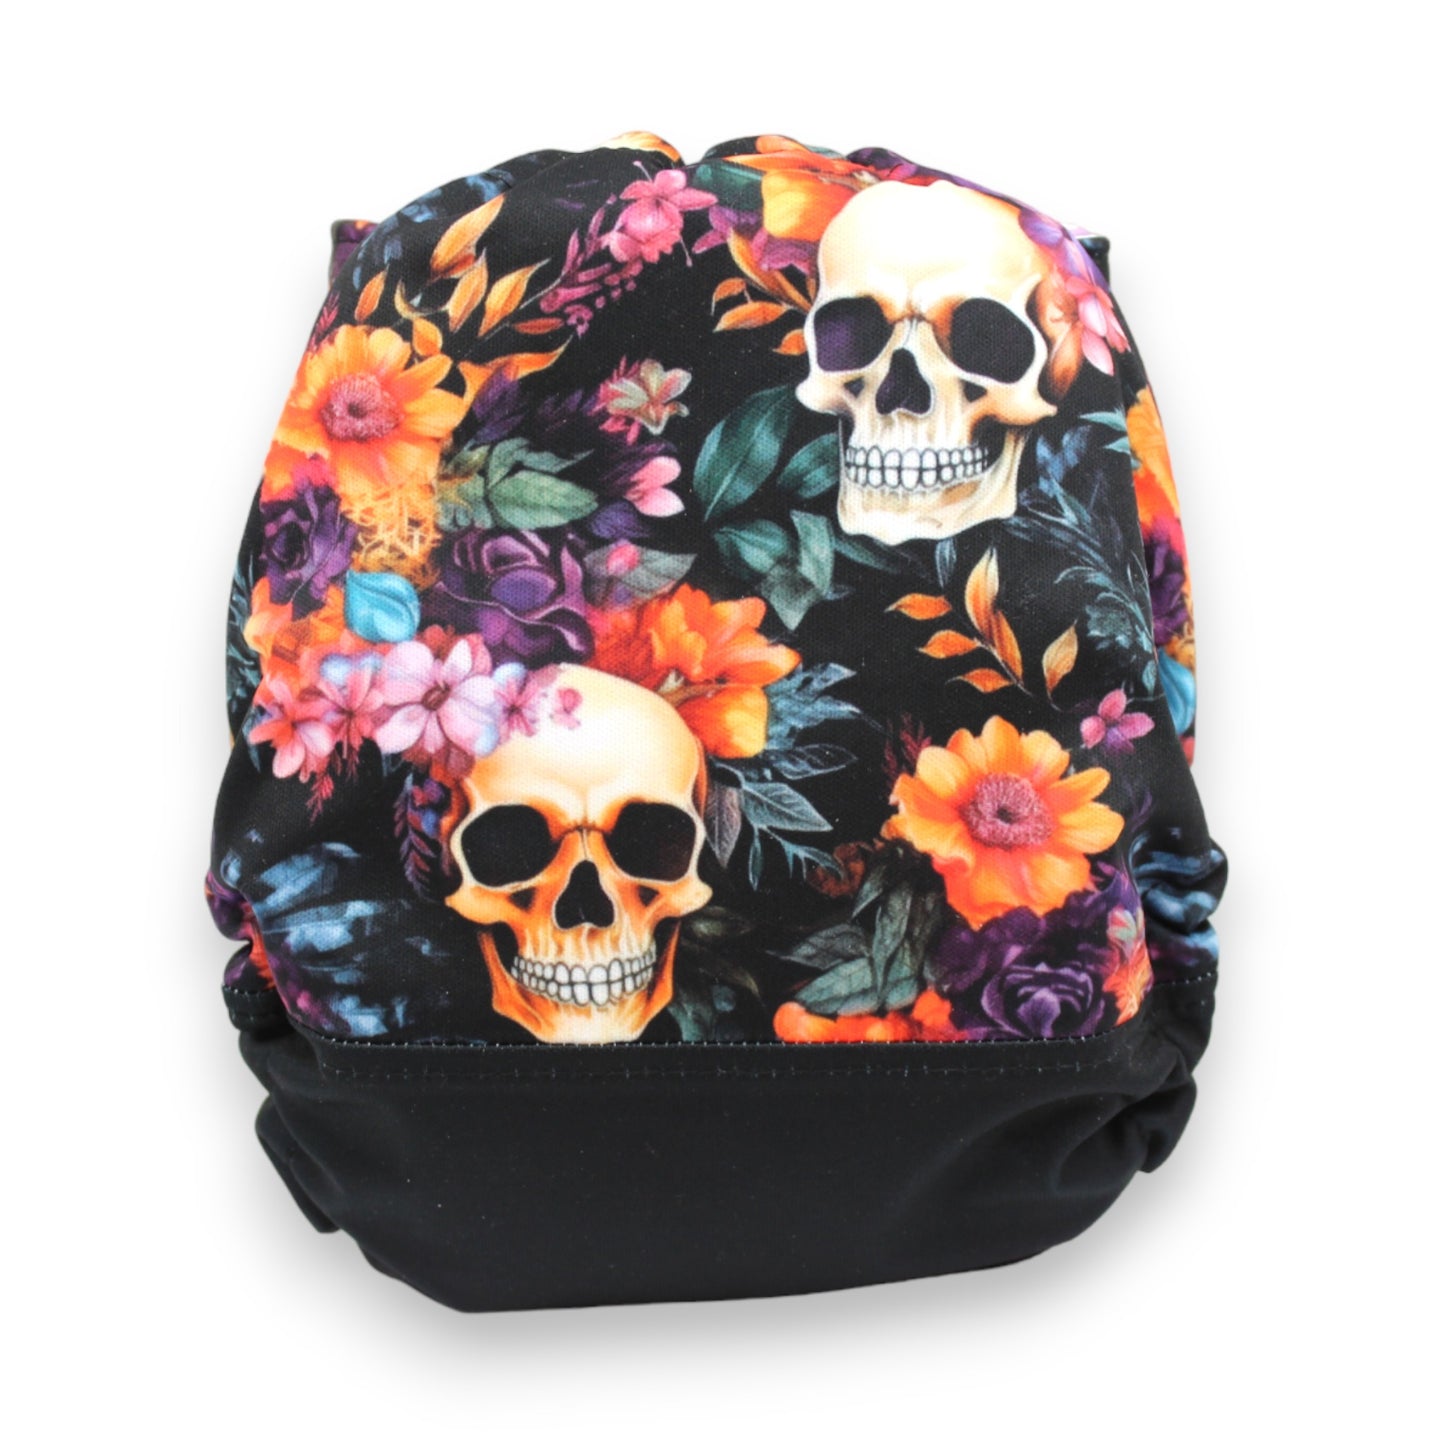 Couches - Skull floral (7266499690633)